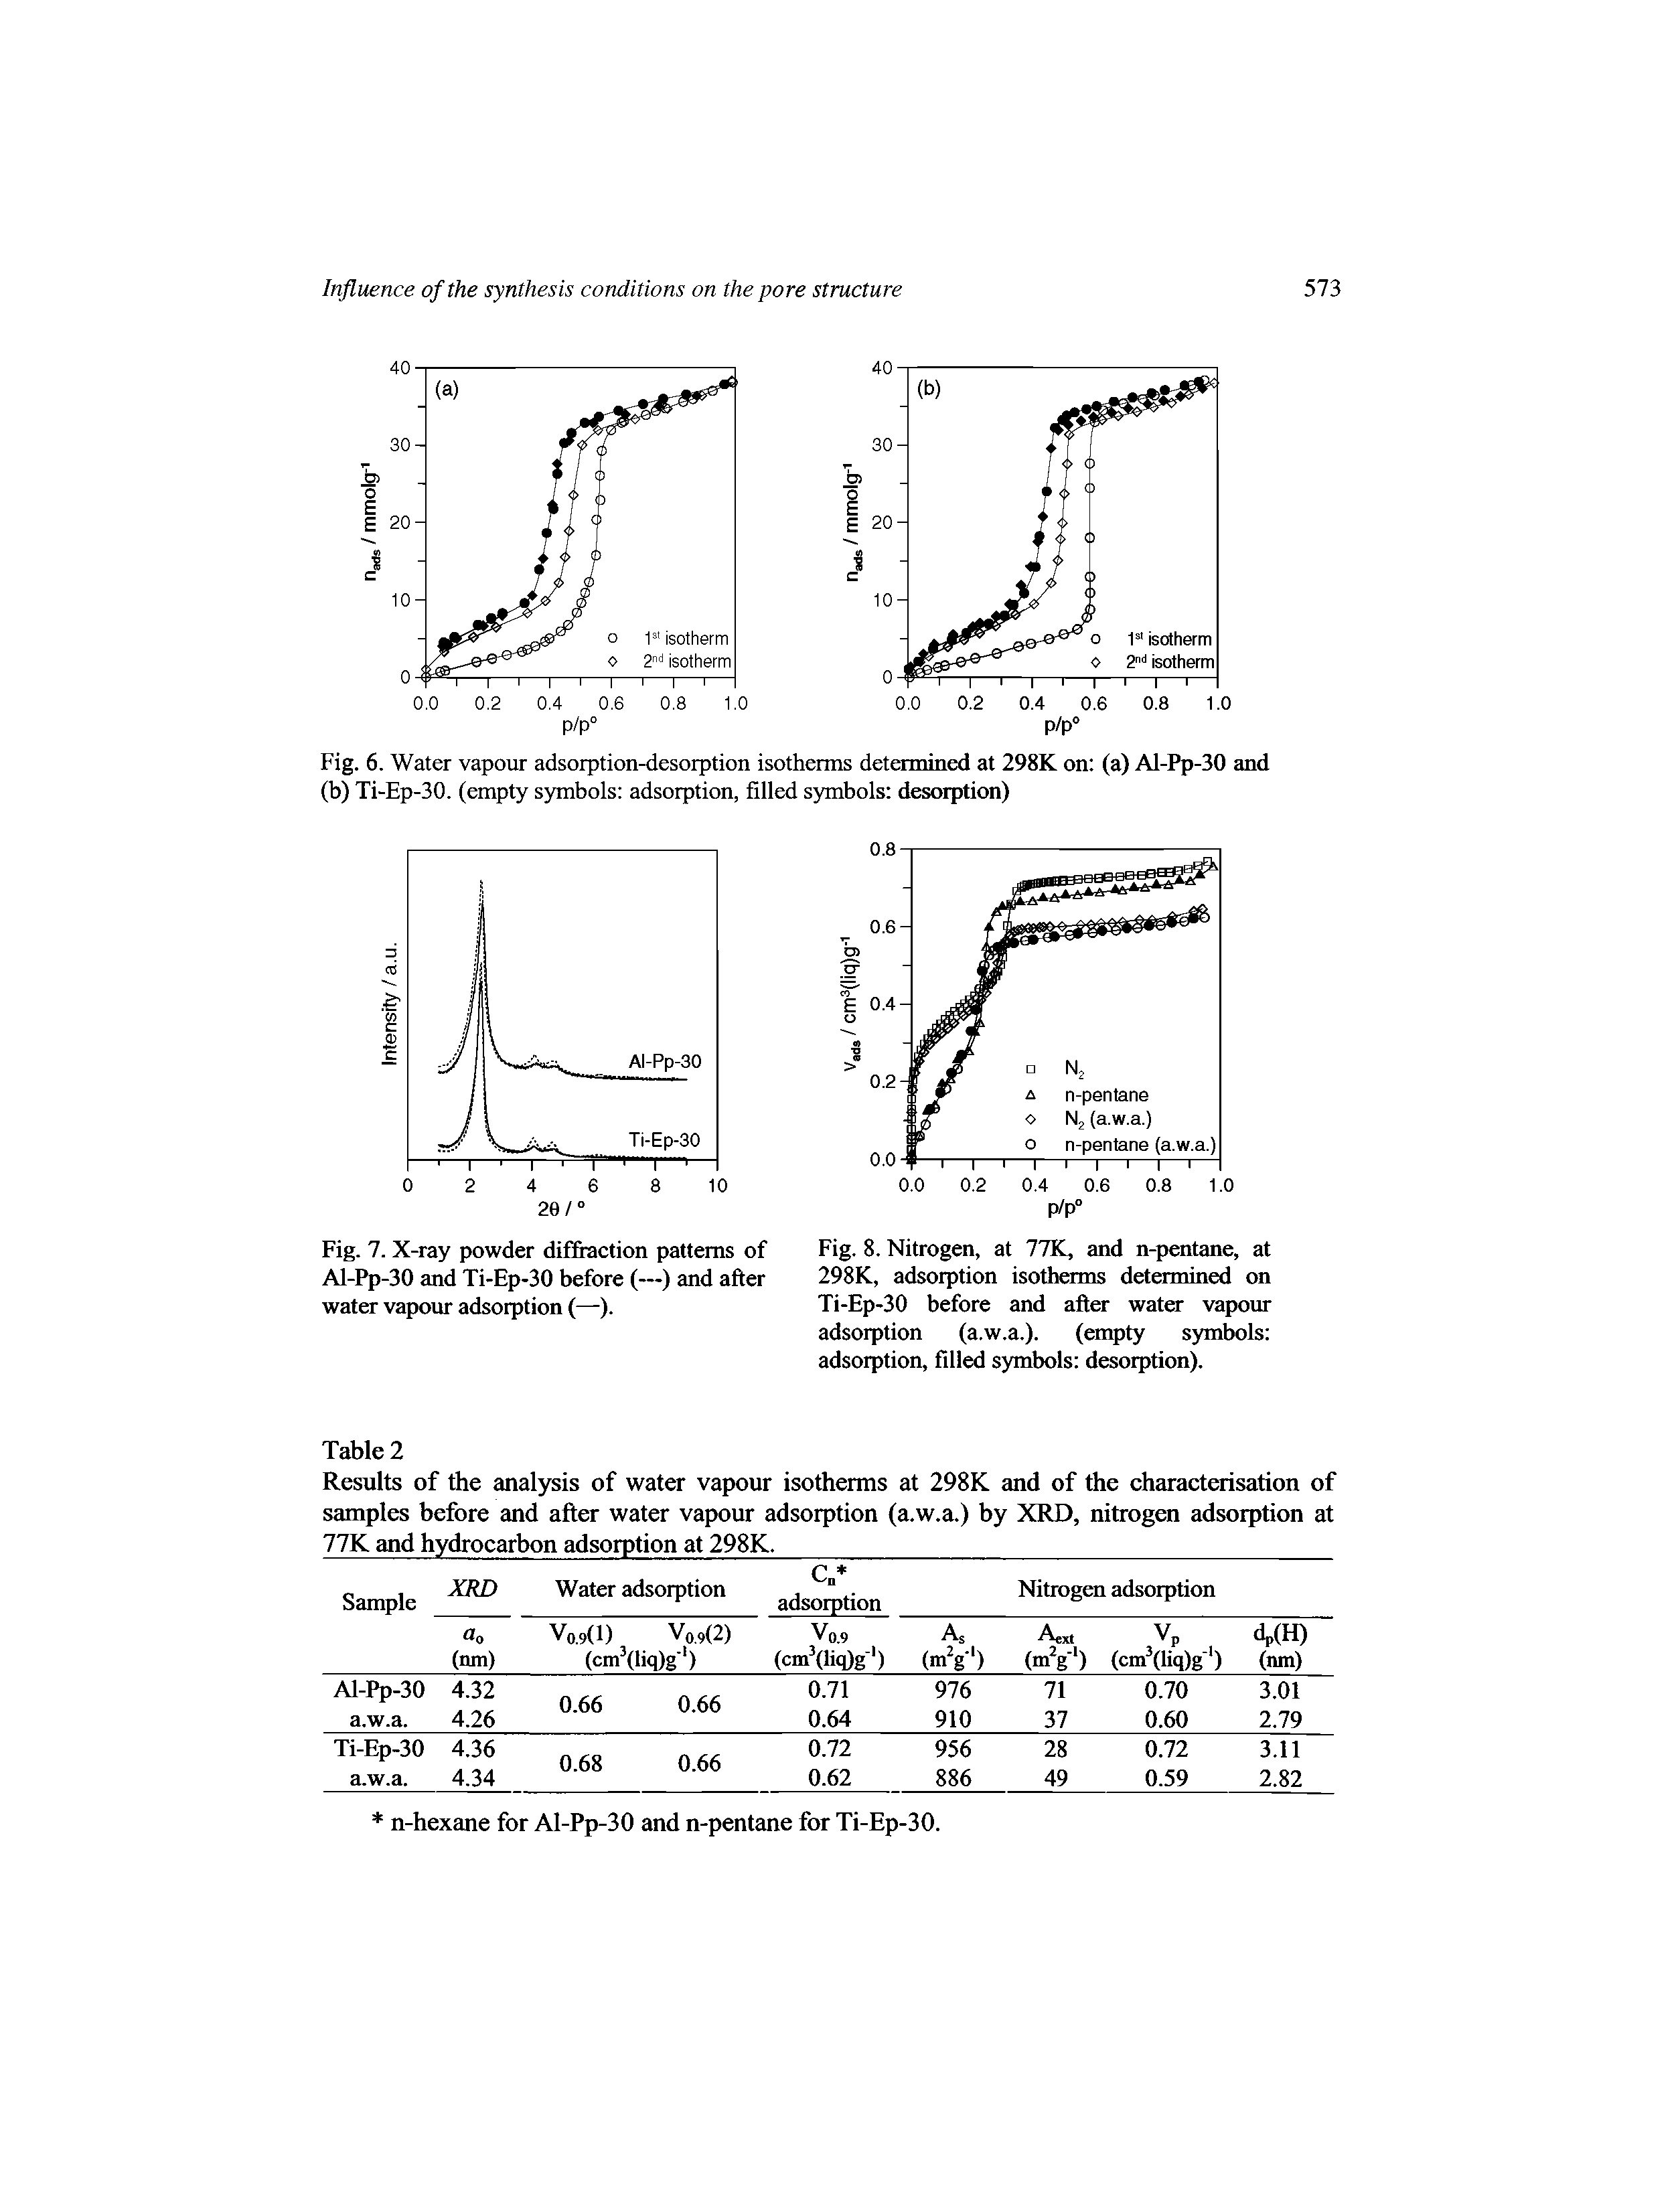 Fig. 8. Nitrogen, at 77K, and n-pentane, at 298K, adsorption isotherms determined on Ti-Ep-30 before and after water vapour adsorption (a.w.a.). (empty symbols adsorption, filled symbols desorption).